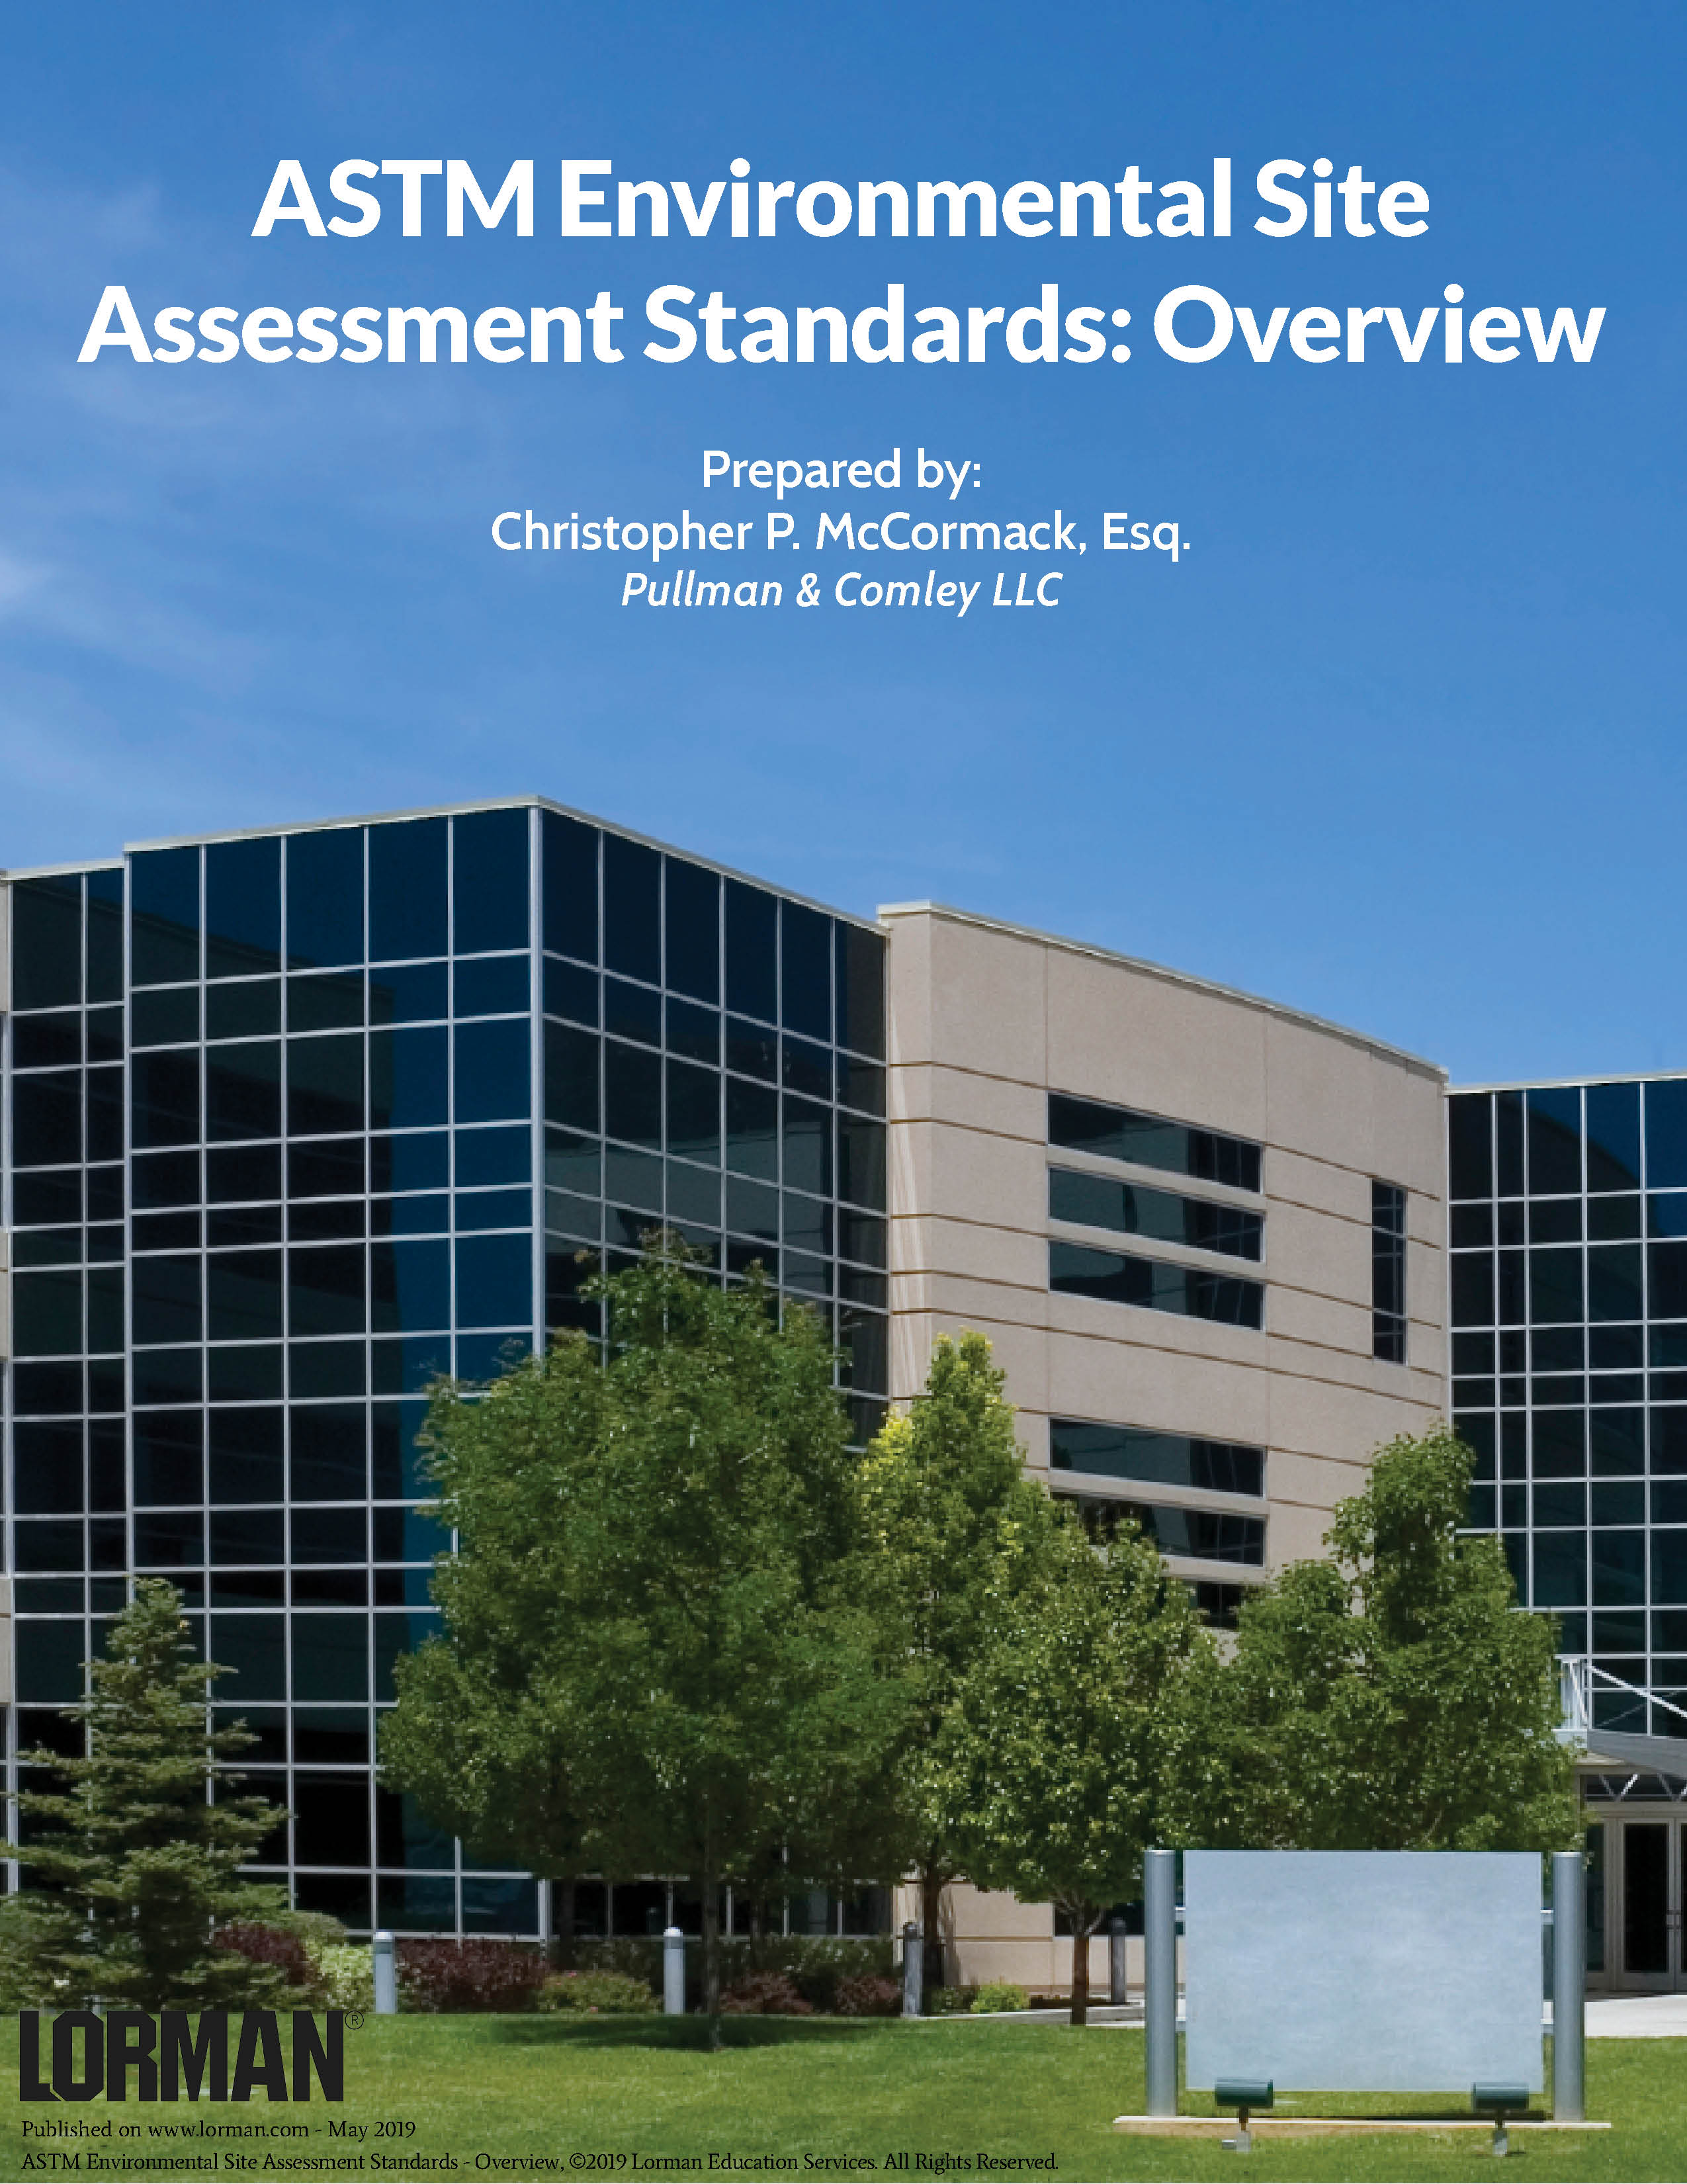 ASTM Environmental Site Assessment Standards: Overview